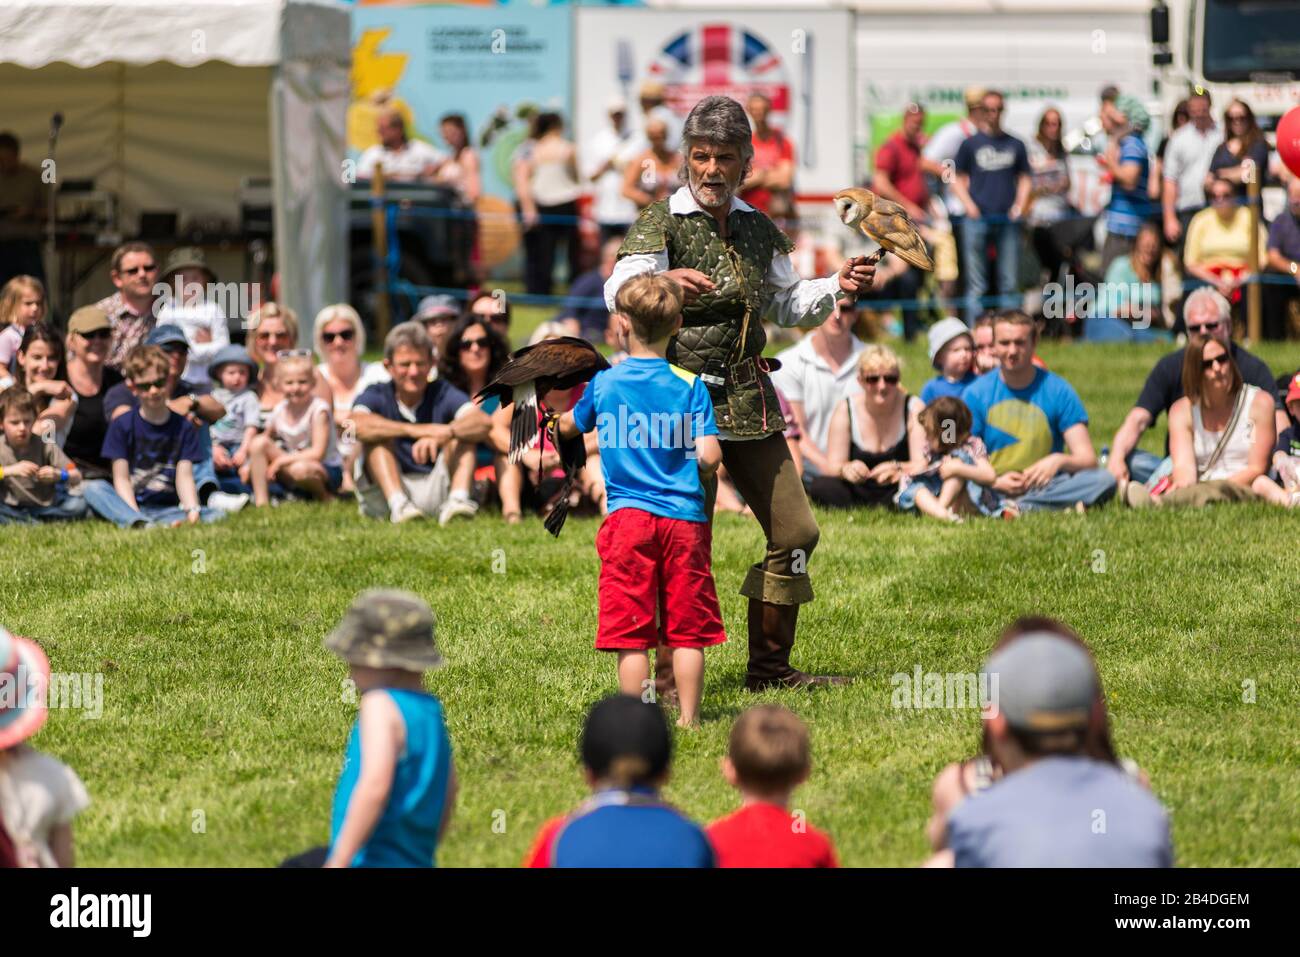 A male falconer with owl and young boy with crowd, Cambridgeshire County Show, United Kingdom Stock Photo